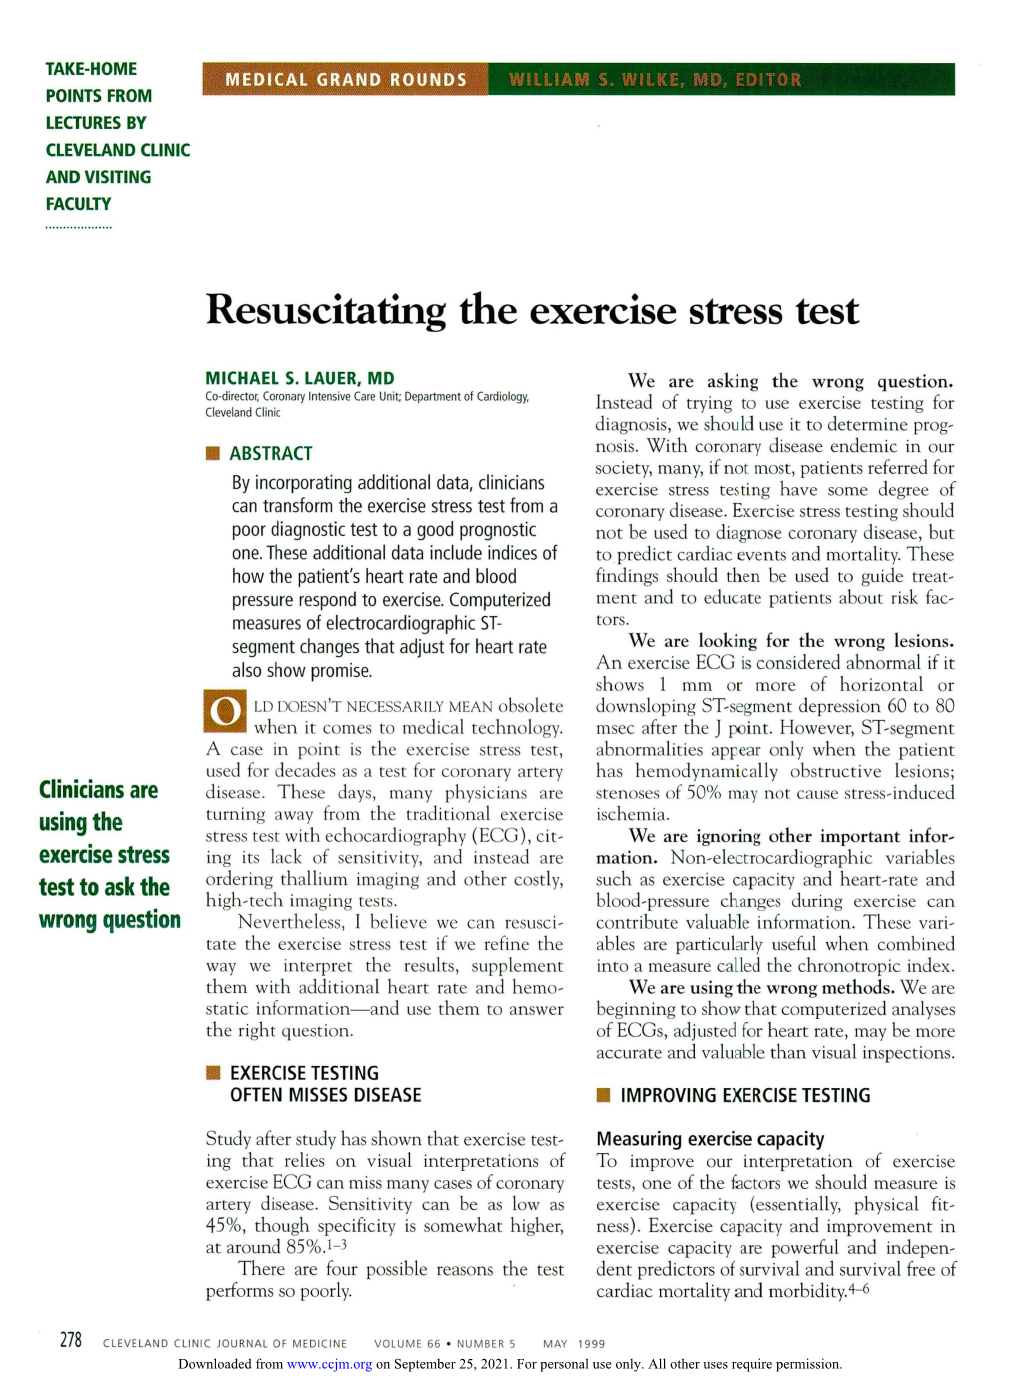 Resuscitating the Exercise Stress Test